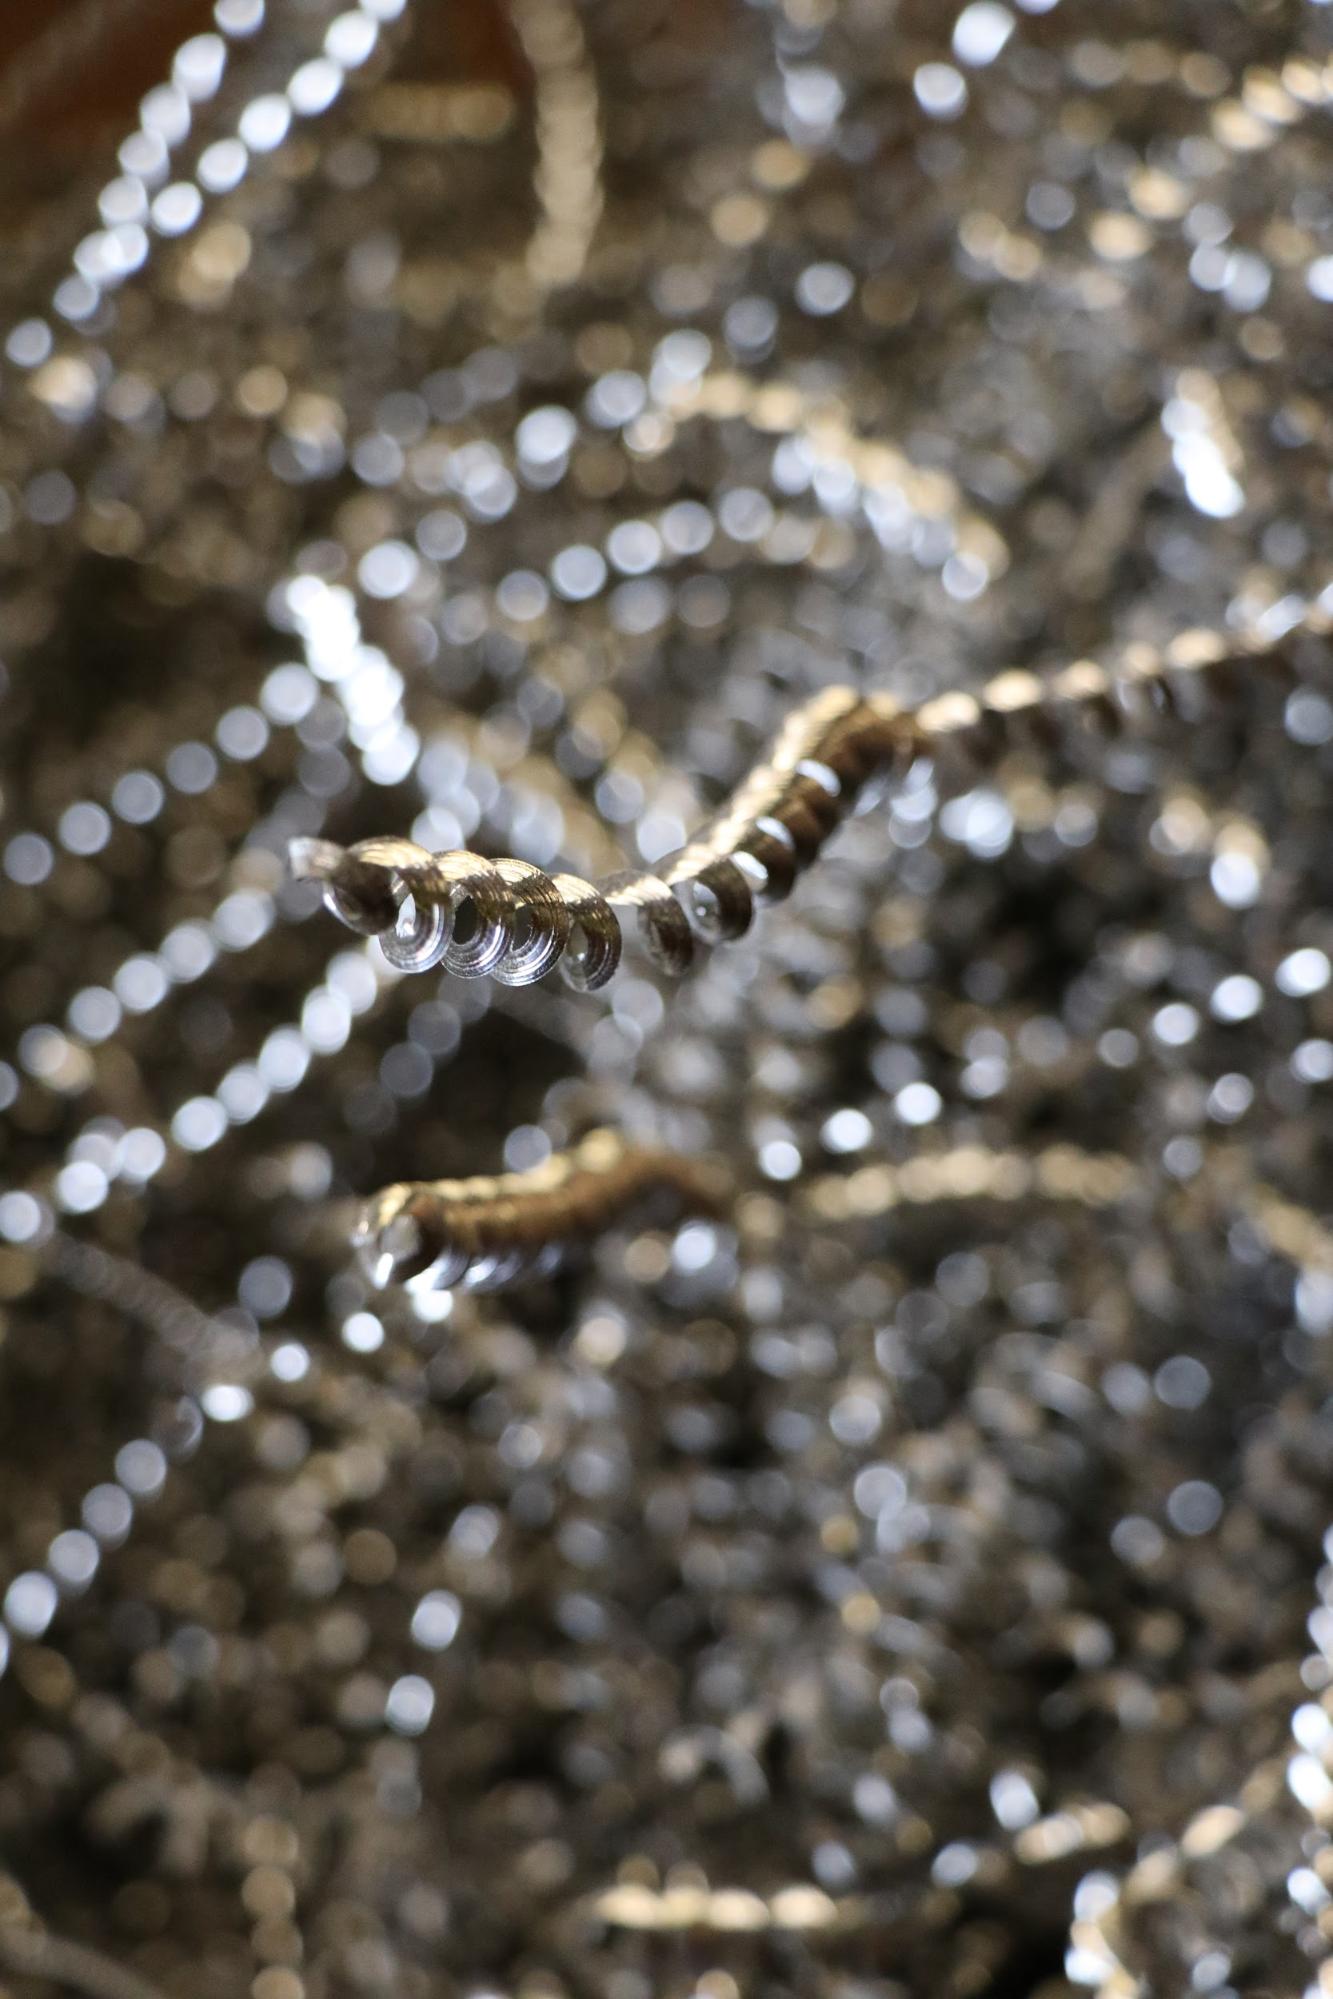 stripped and processed steel swarf that is essential to the manufacturing supply chain